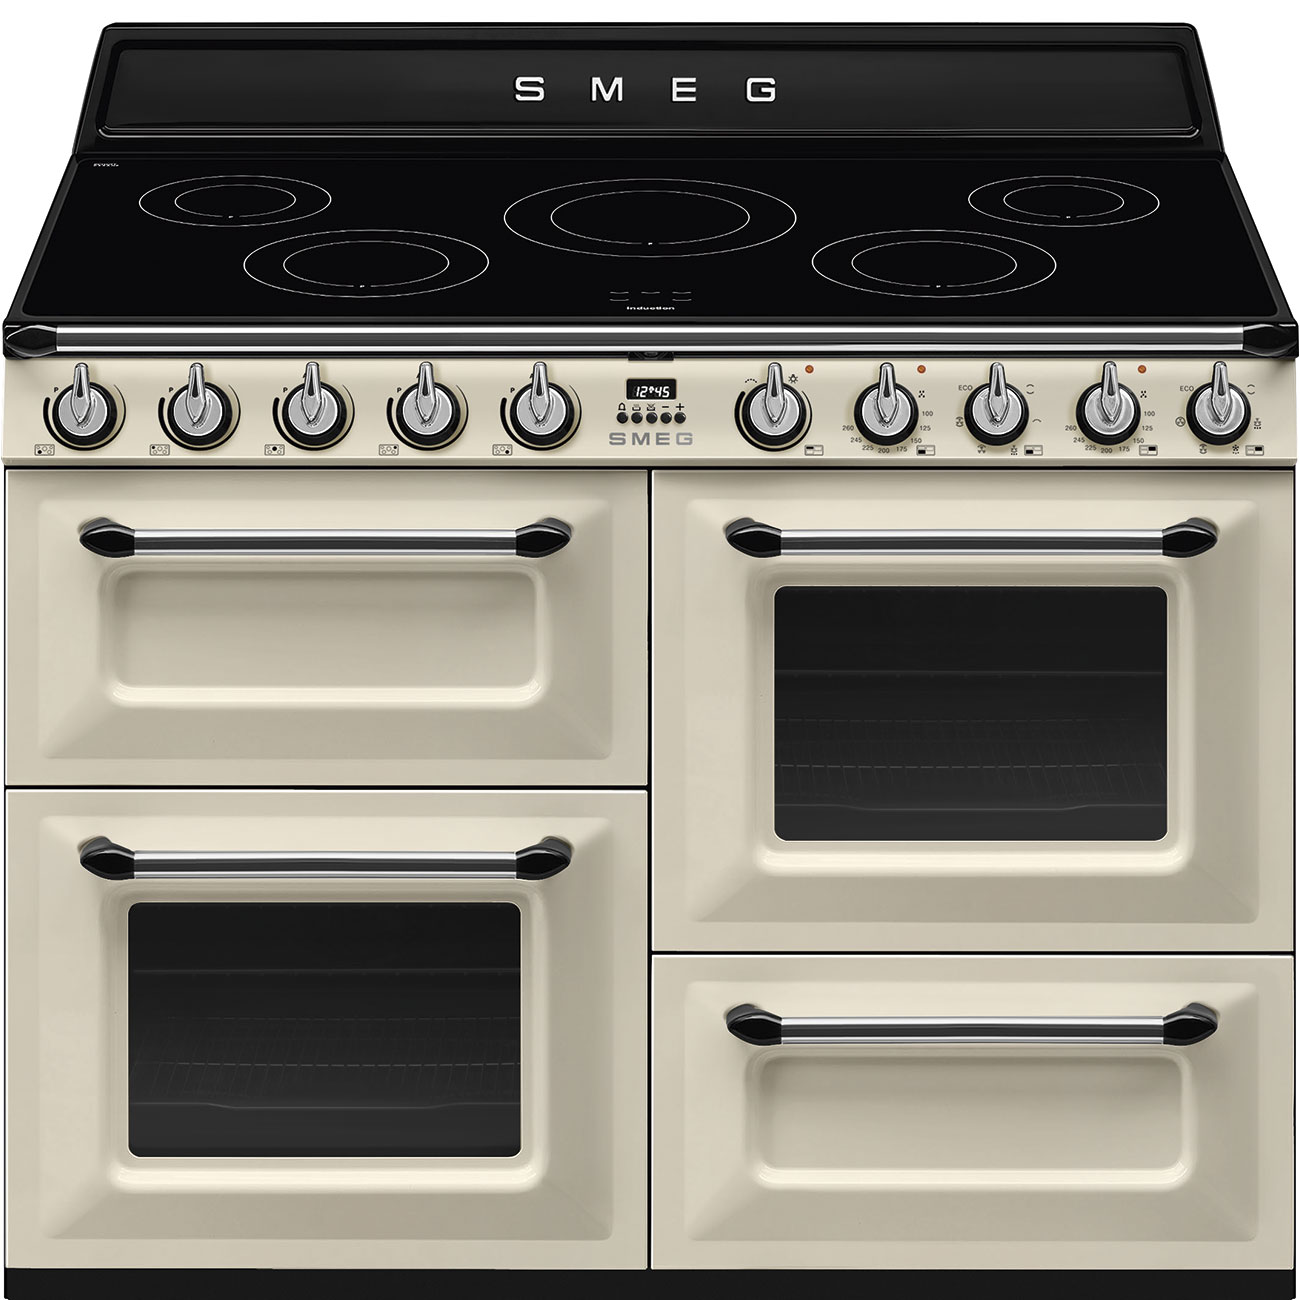 Smeg Cream Cooker with Induction Hob_1